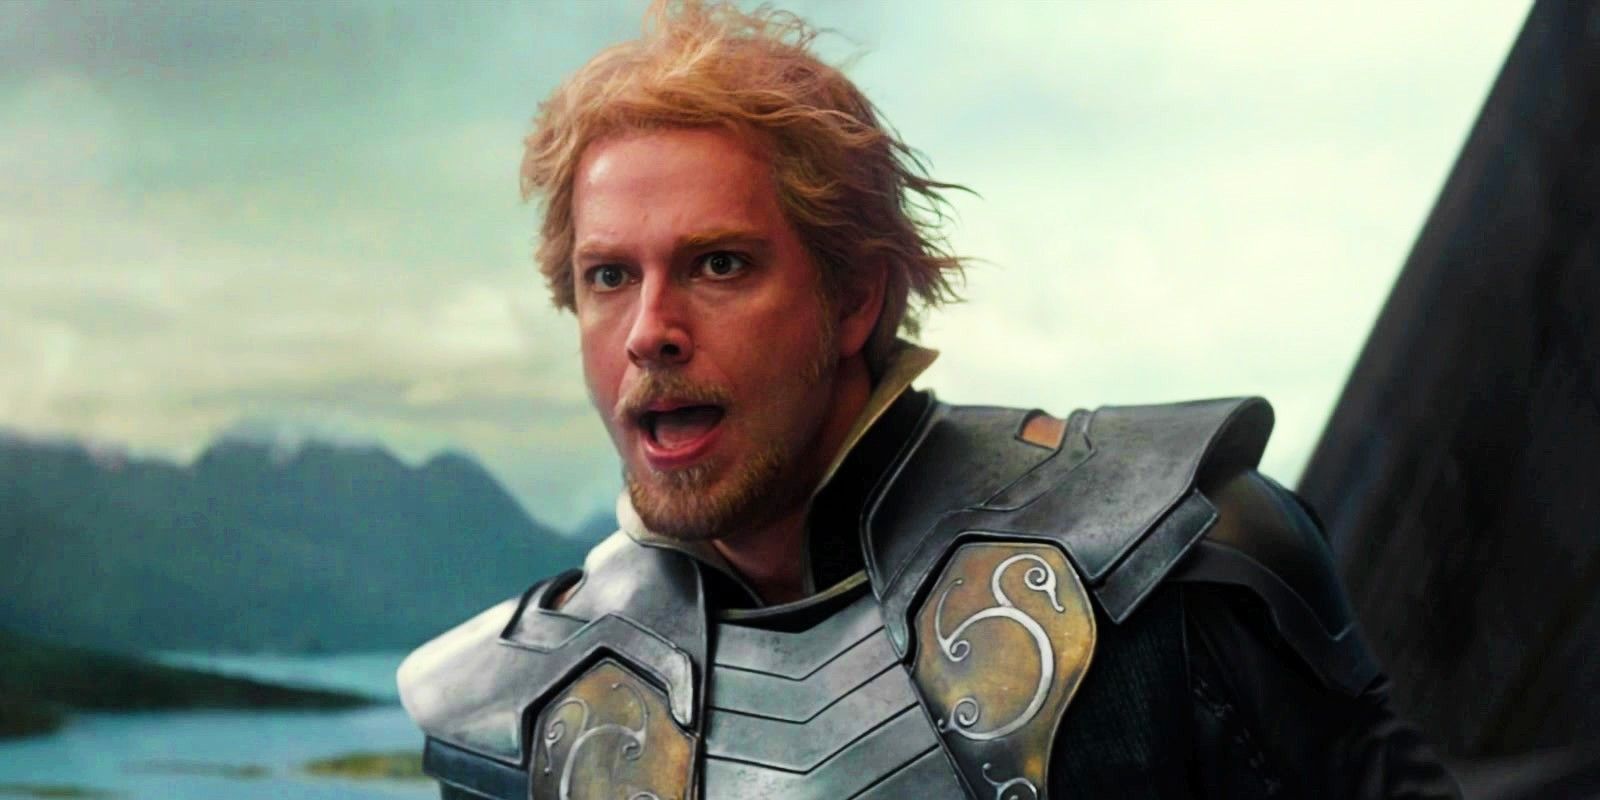 Tutor kyst anmodning Zachary Levi Says Marvel's Kevin Feige Misled Him About Thor Movie Role